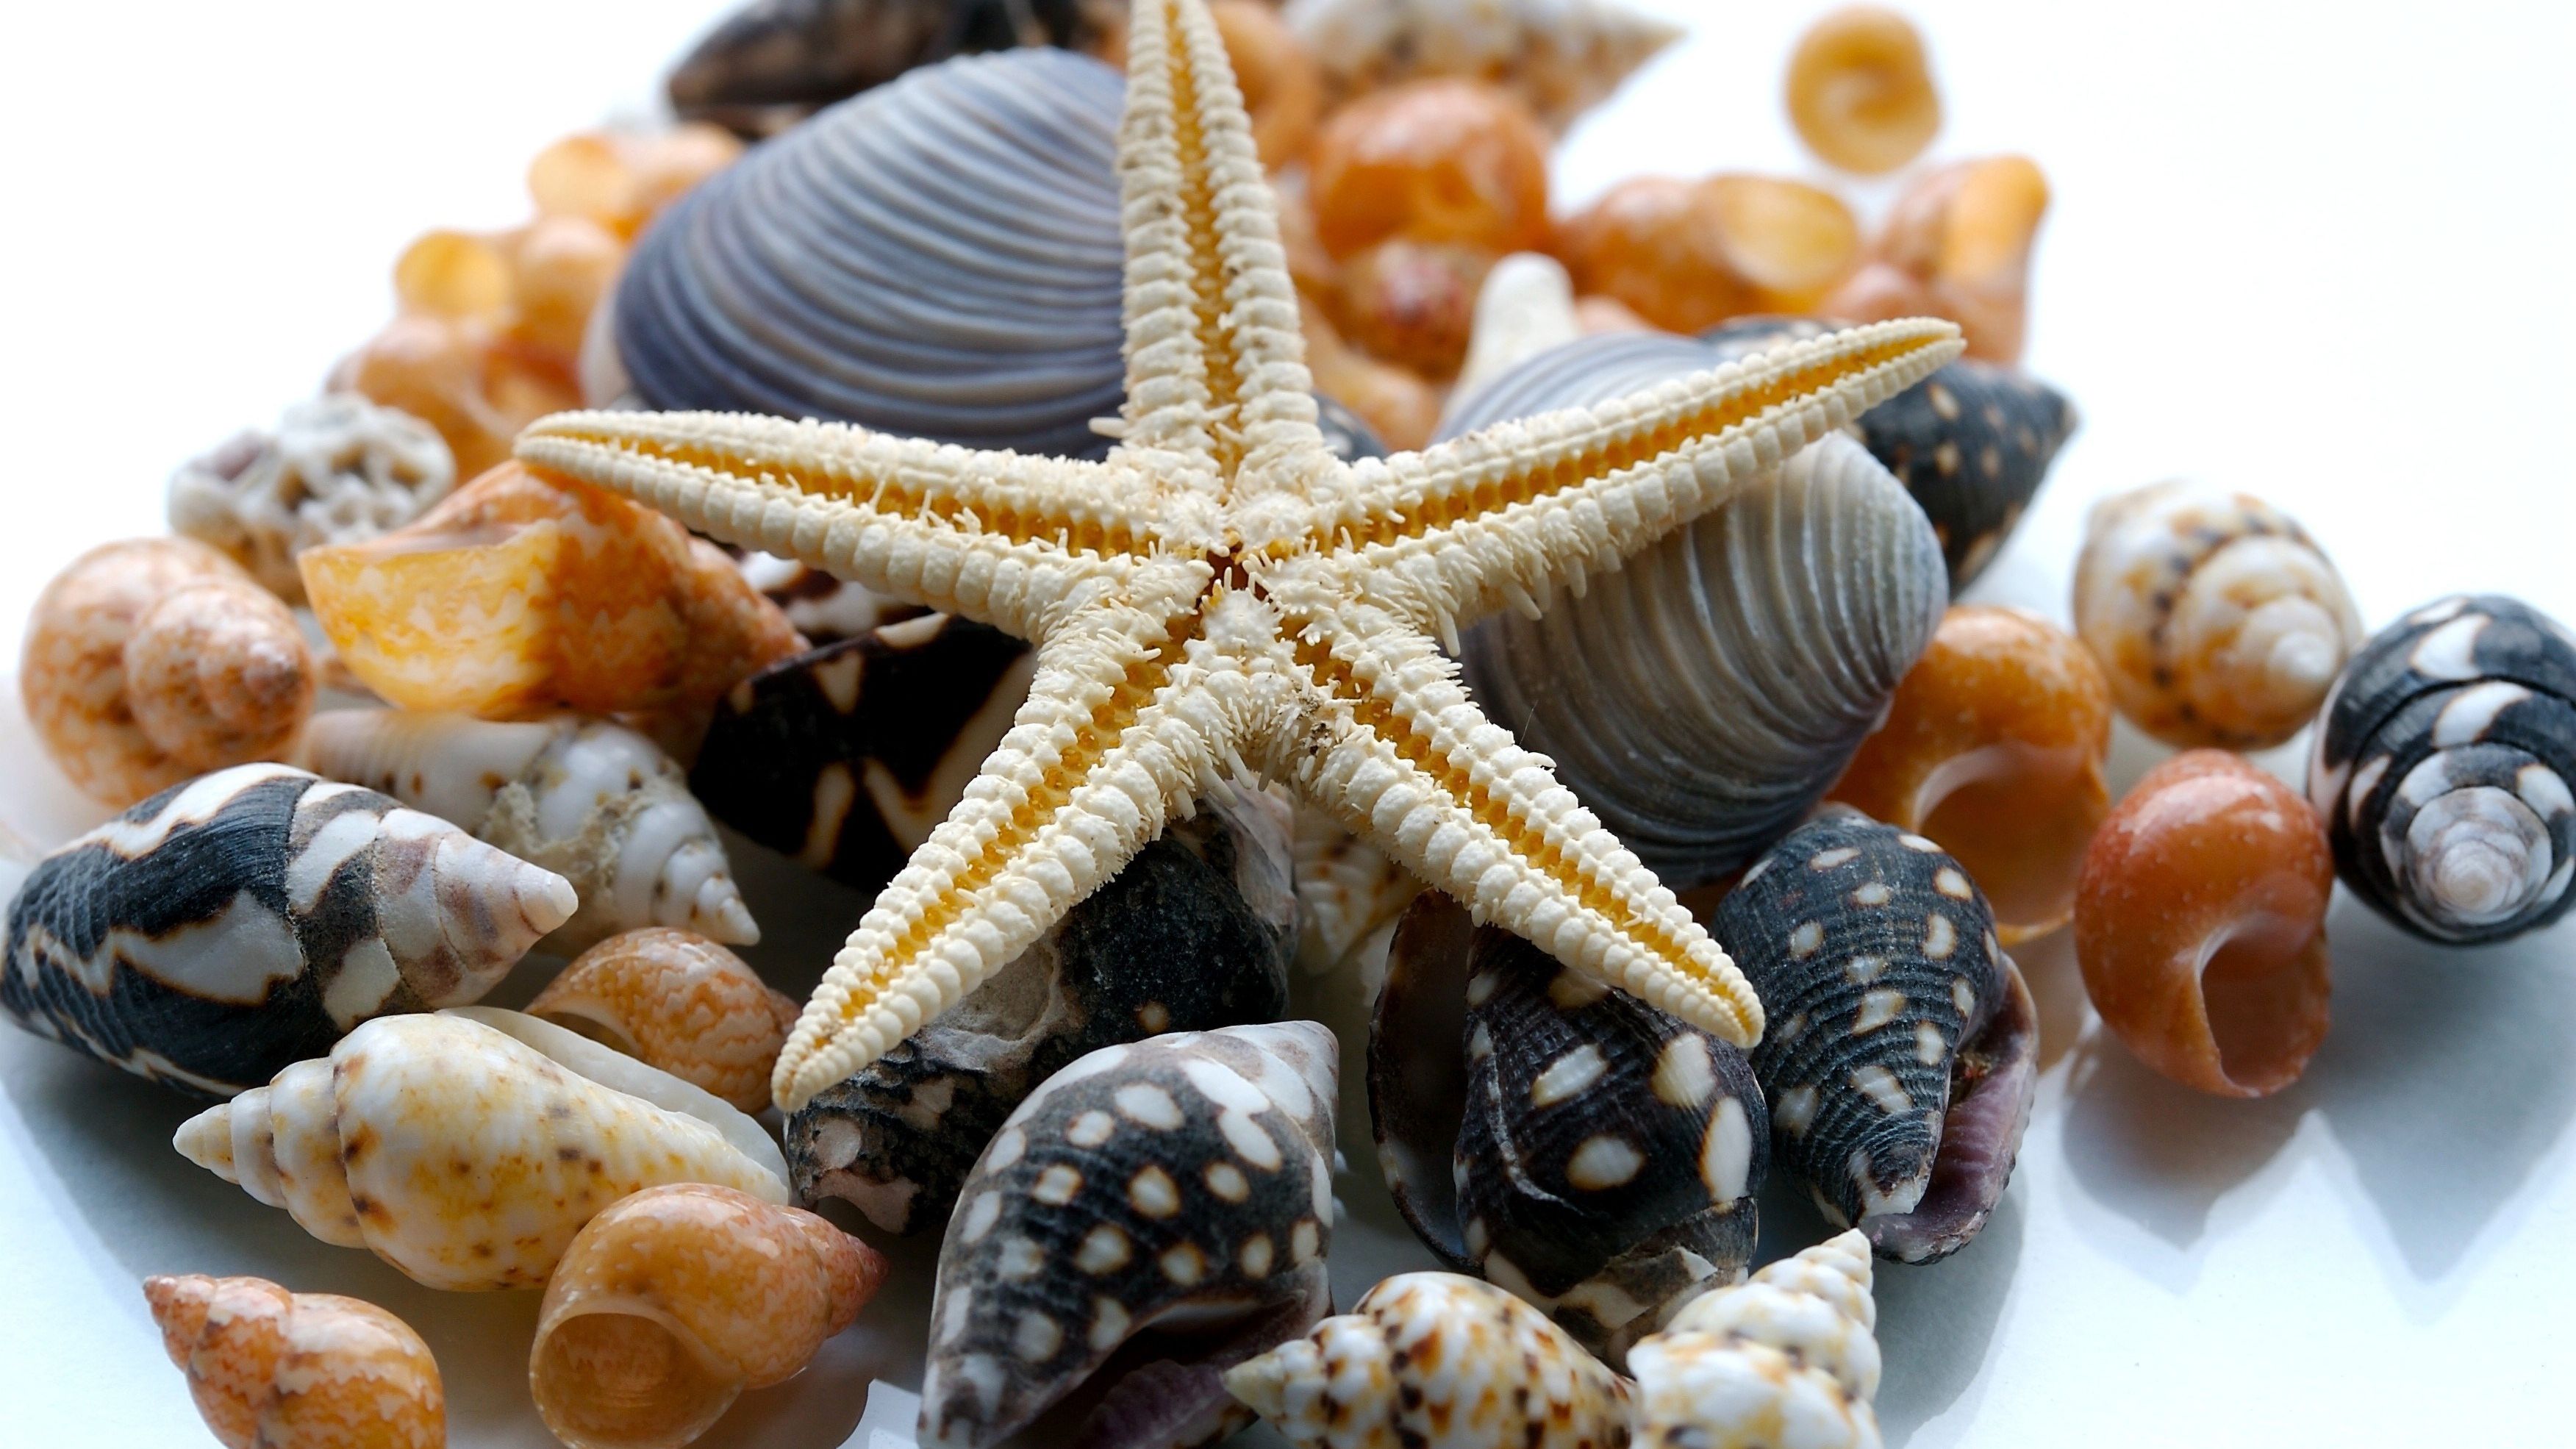 Seashells Wallpapers HD Free Download [60 pictures] - Nature Wallpaper